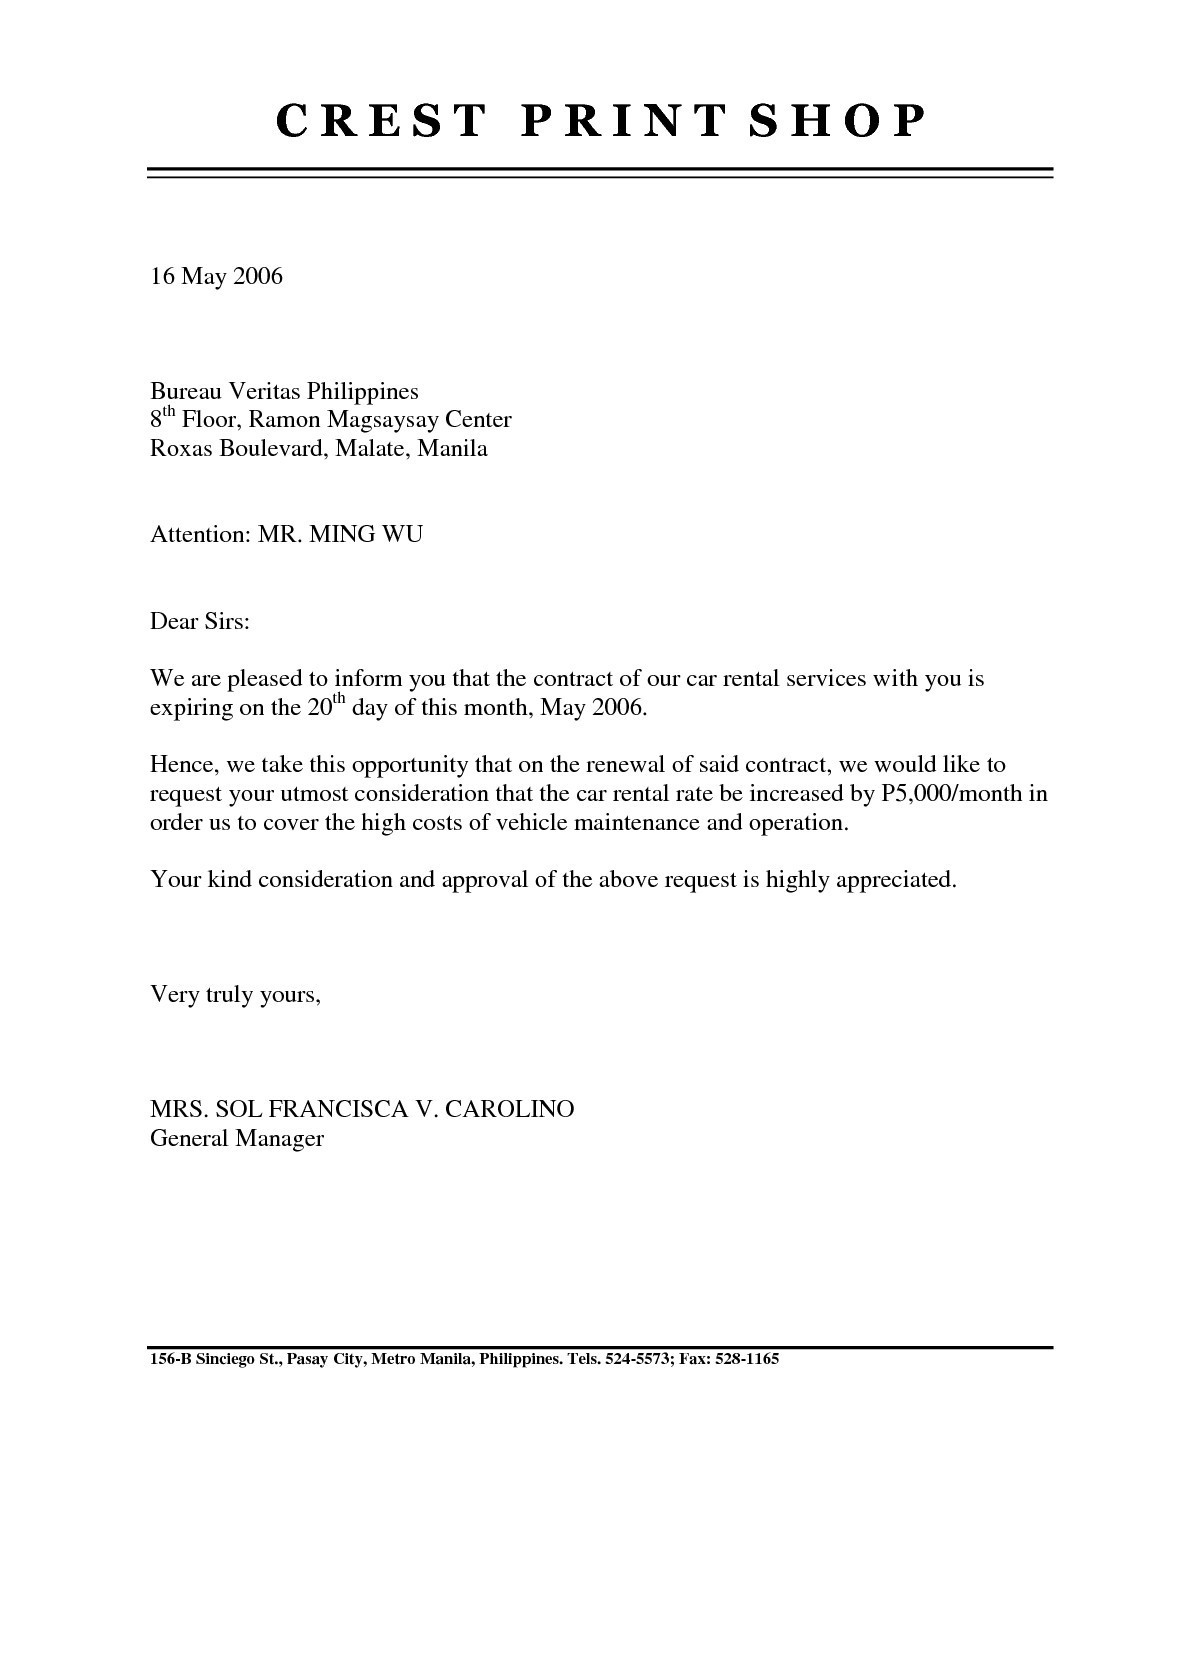 rental application cover letter template example-A General Cover Letter Template Archives Valid Sample A General Cover Letter 31 Od Renewal Letter 10-l